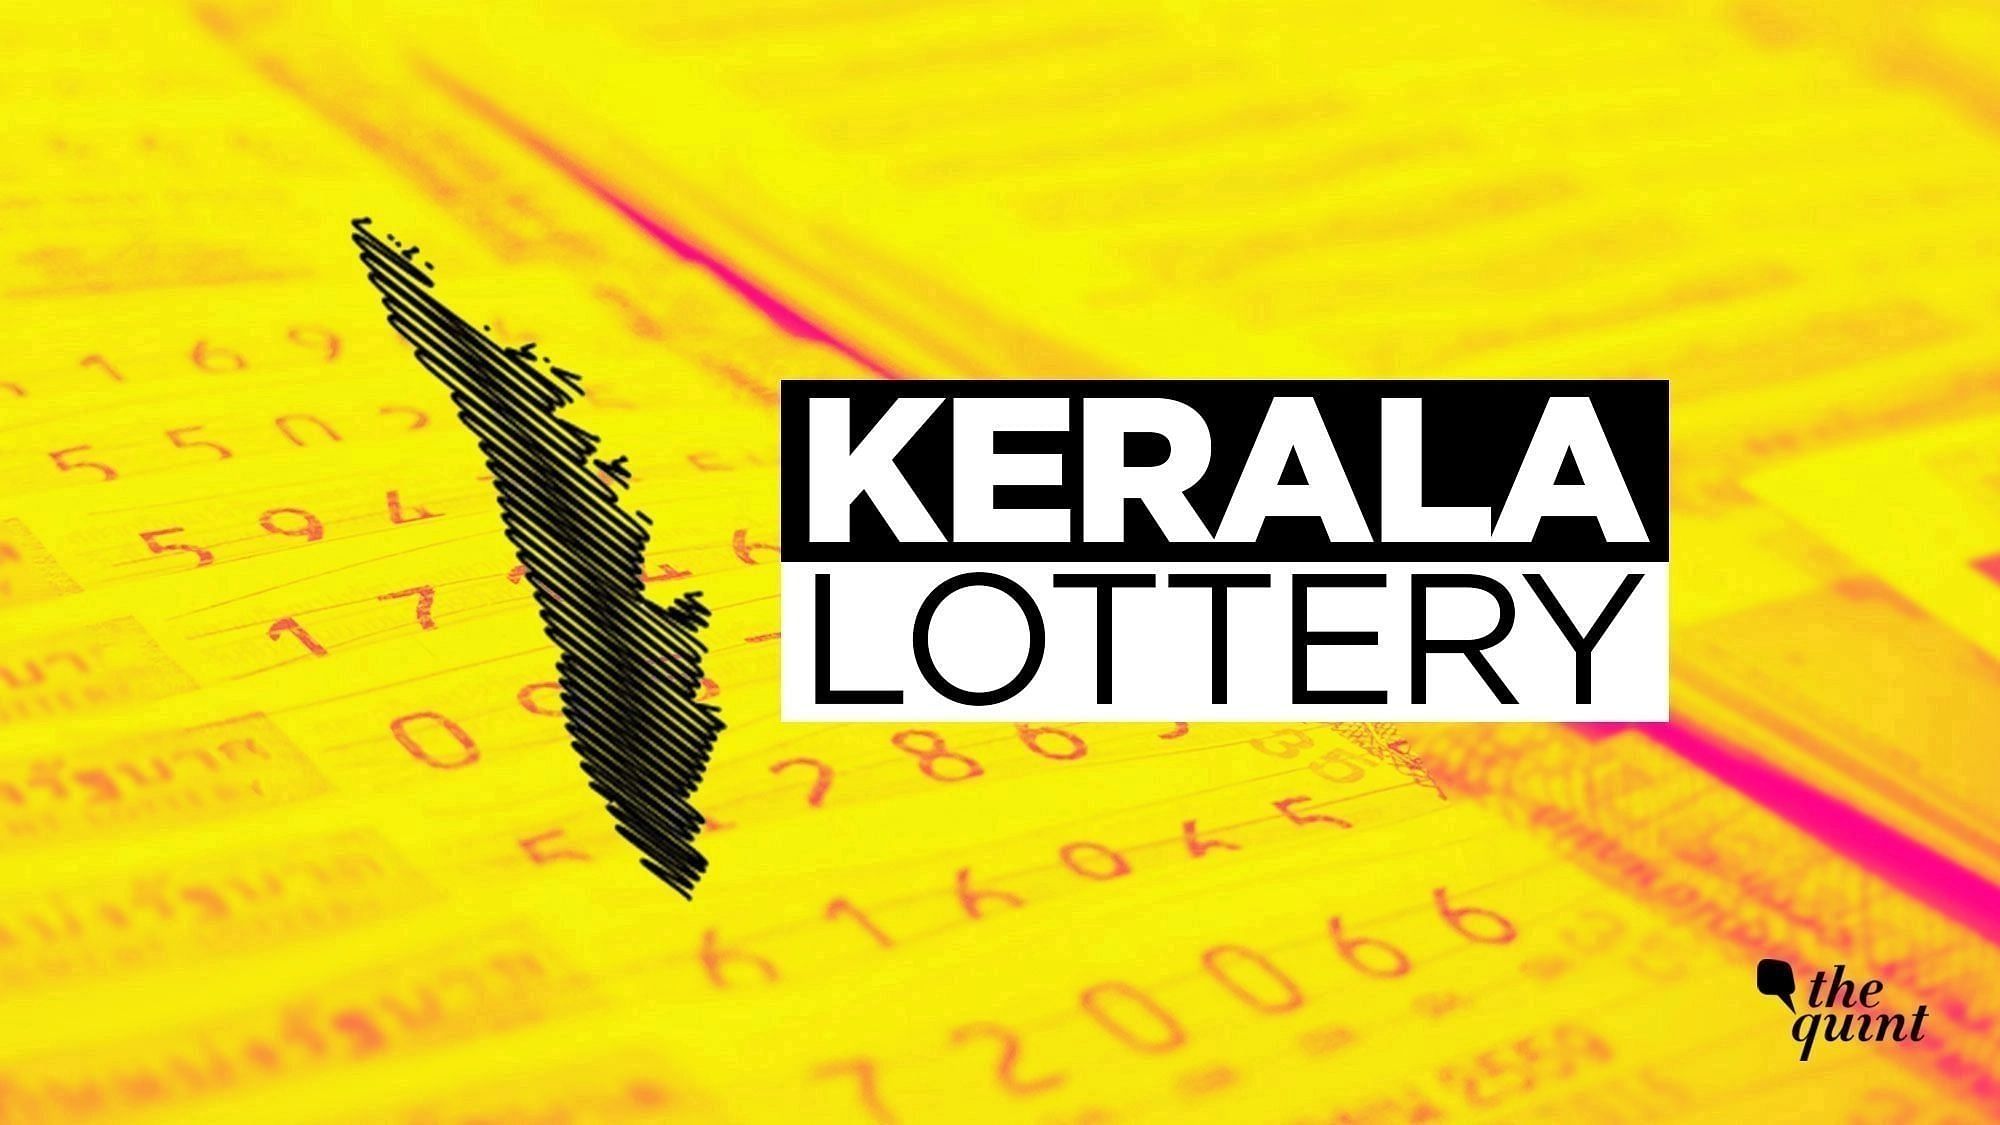 <div class="paragraphs"><p>Here are the prize money details of the Kerala lottery&nbsp;AKSHAYA(AK-567) today, 21 September 2022.</p></div>